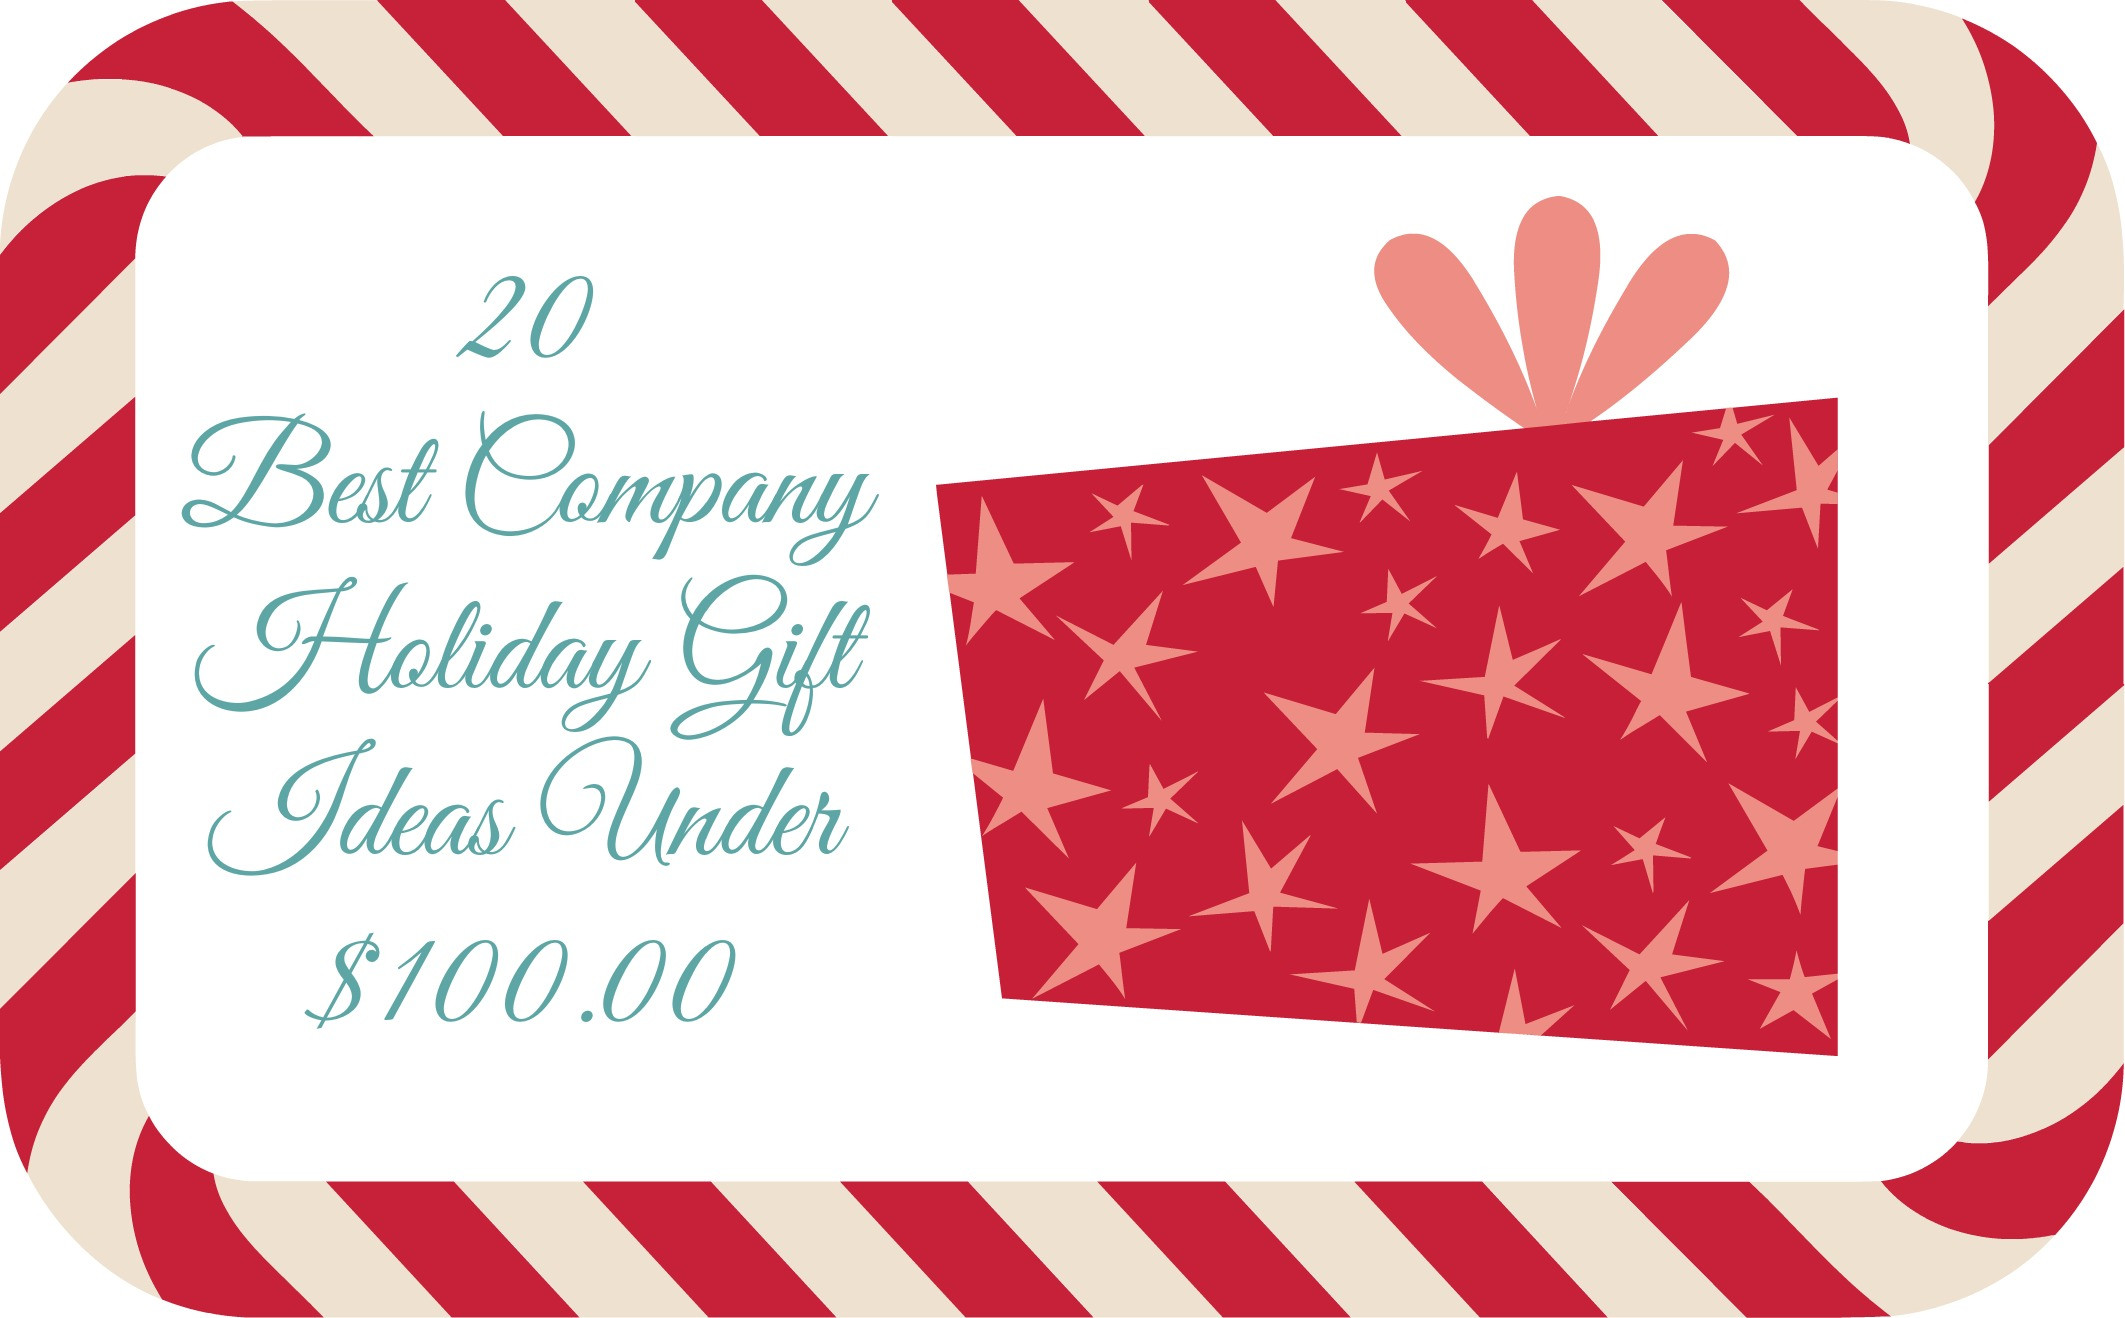 Holiday Client Gift Ideas
 20 Best Realtor Holiday Gift Ideas Under $100 00